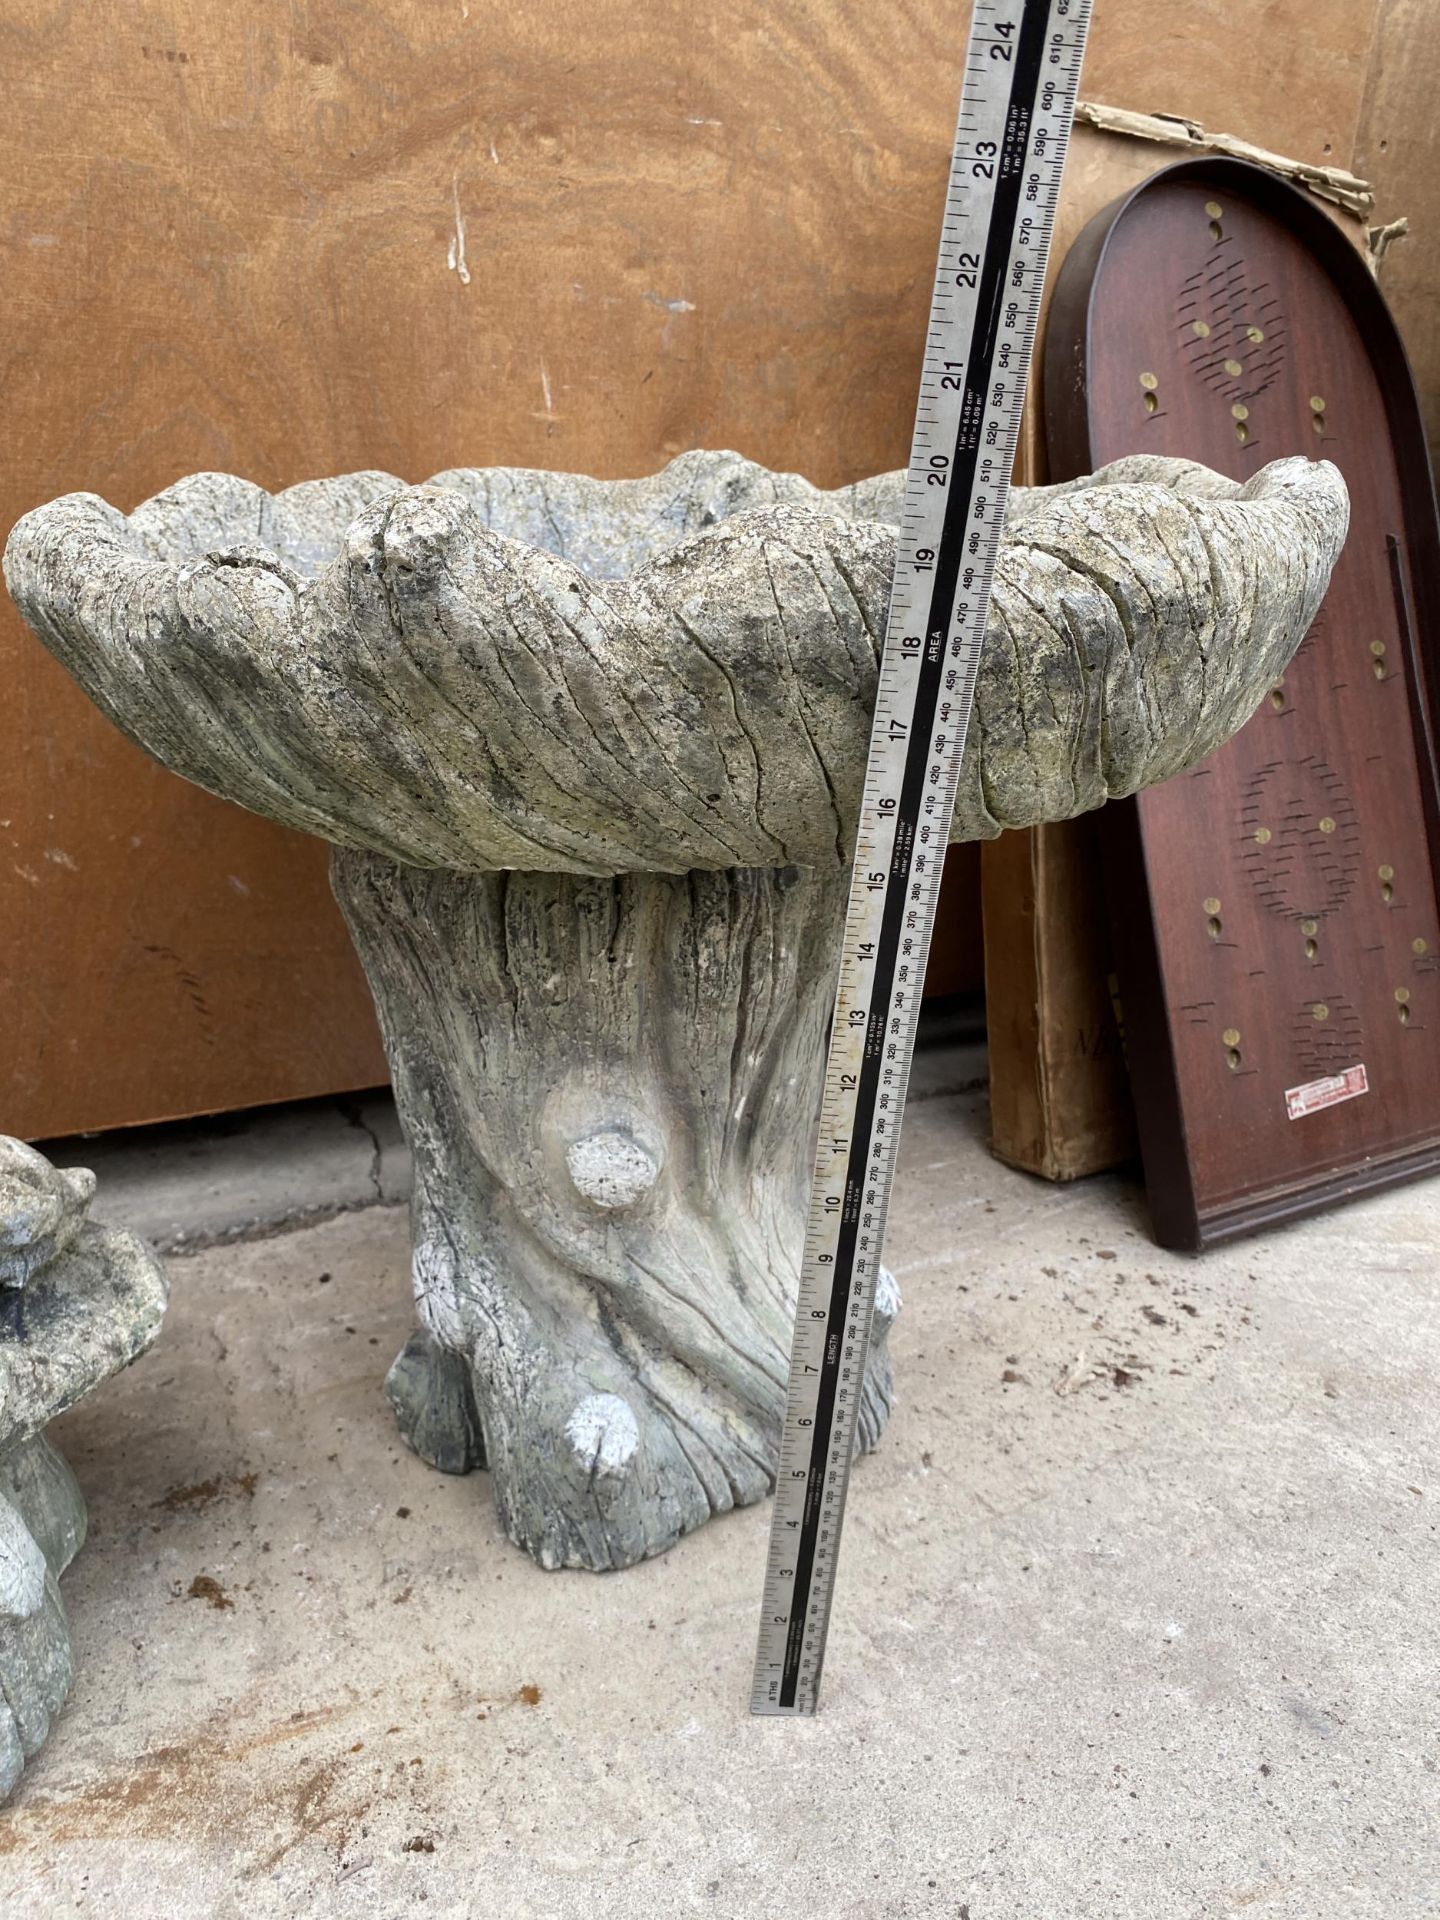 A LARGE RECONSTITUTED STONE BIRD BATH WITH PEDESTAL BASE - Image 4 of 4